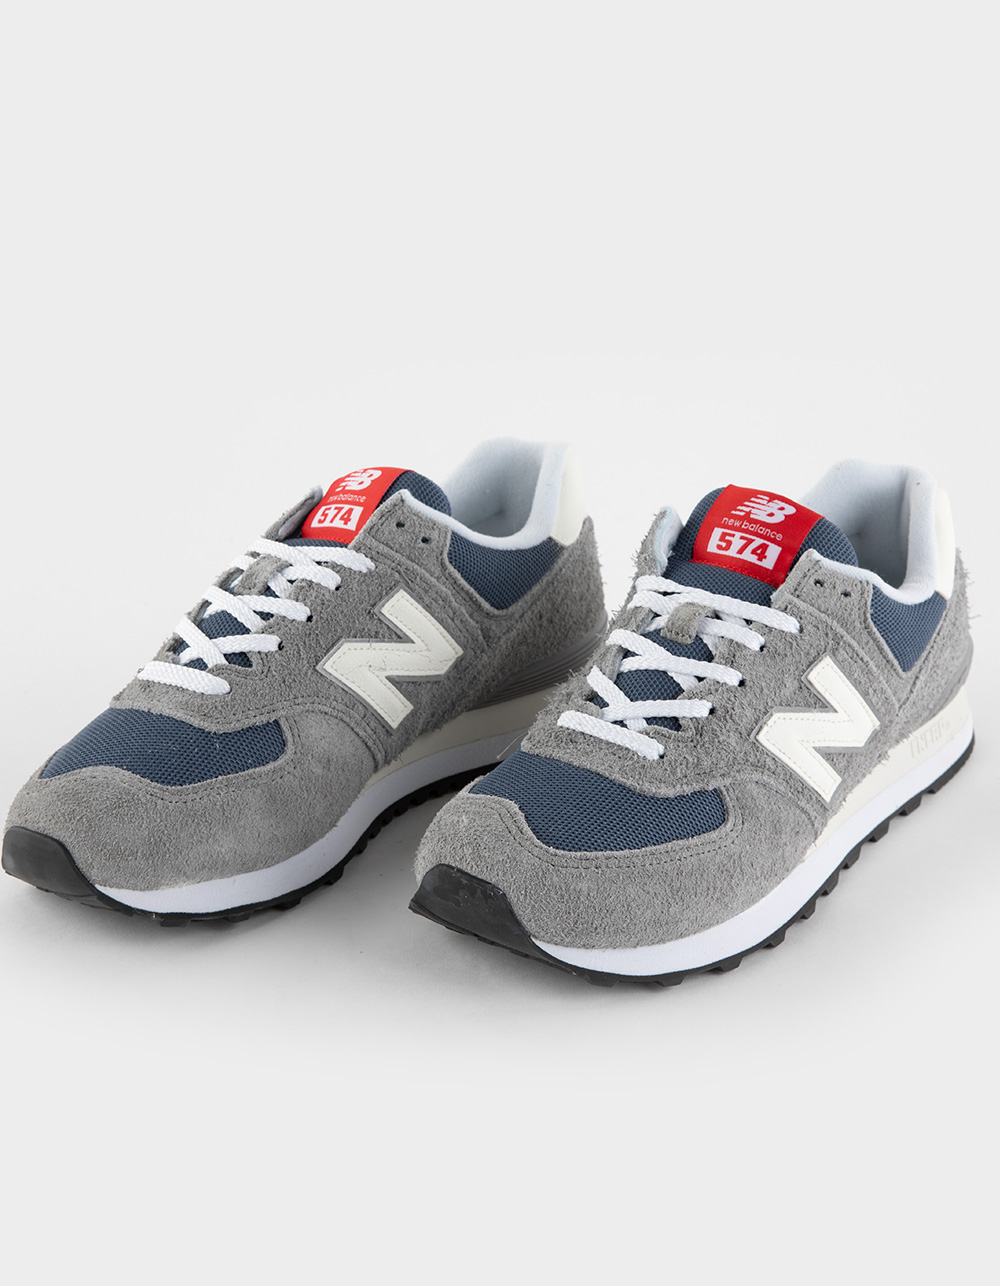 NEW BALANCE 574 Mens Shoes - GRY/NVY | Tillys